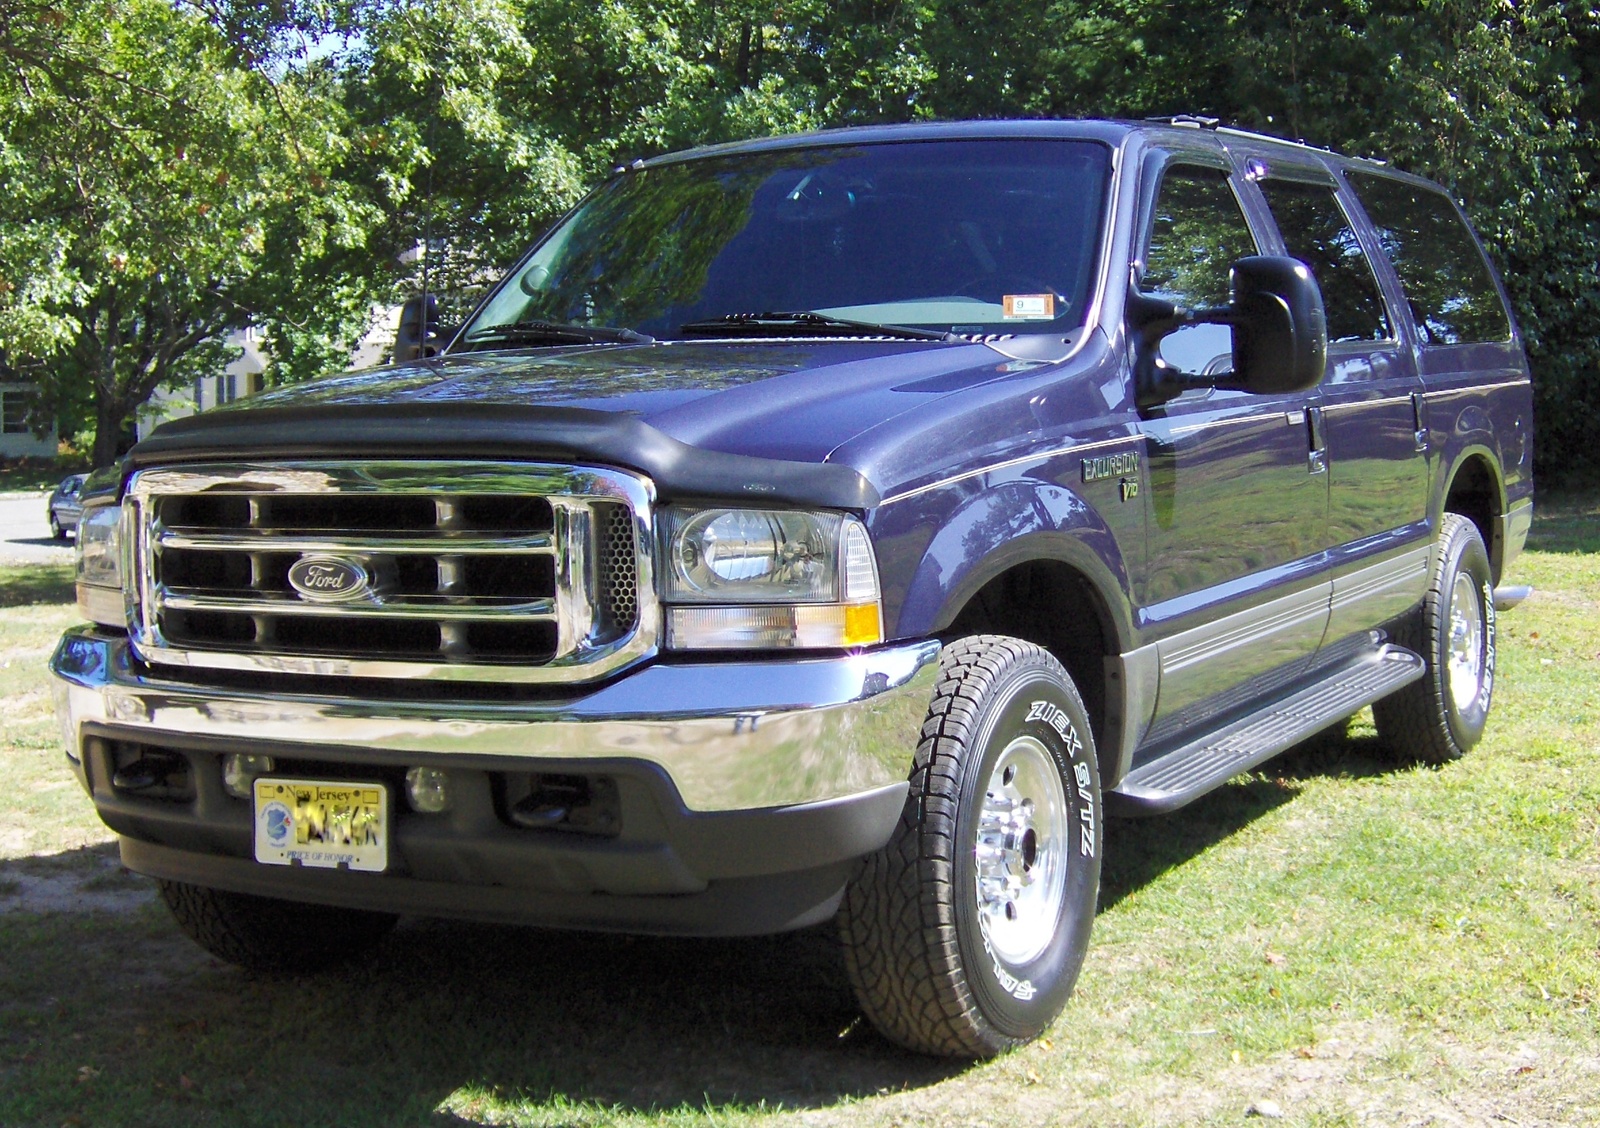 2001 Ford excursion towing capacity #7